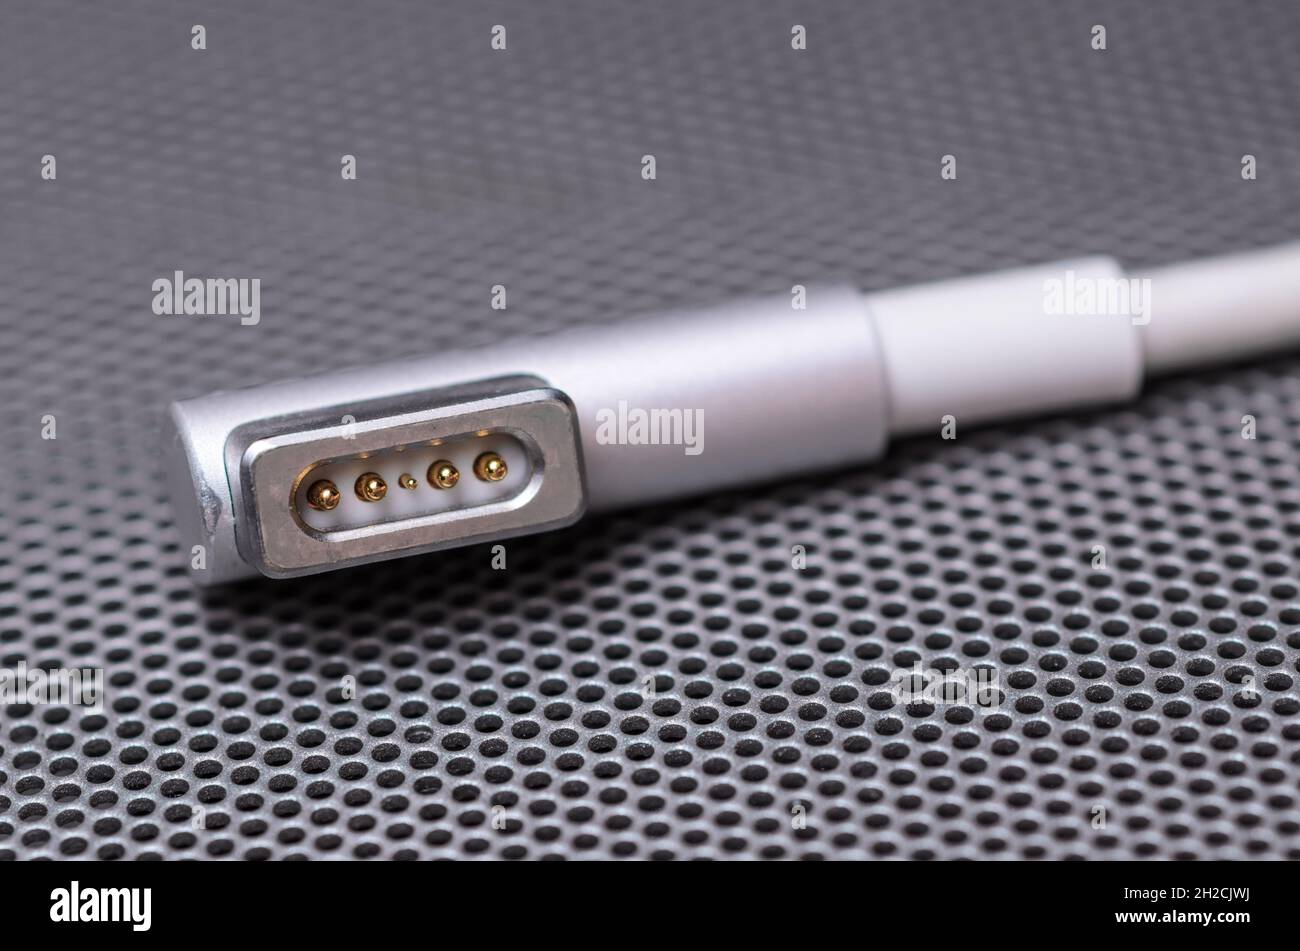 Close-up Apple MagSafe power connector for MacBook Pro on metallic mesh surface Stock Photo - Alamy